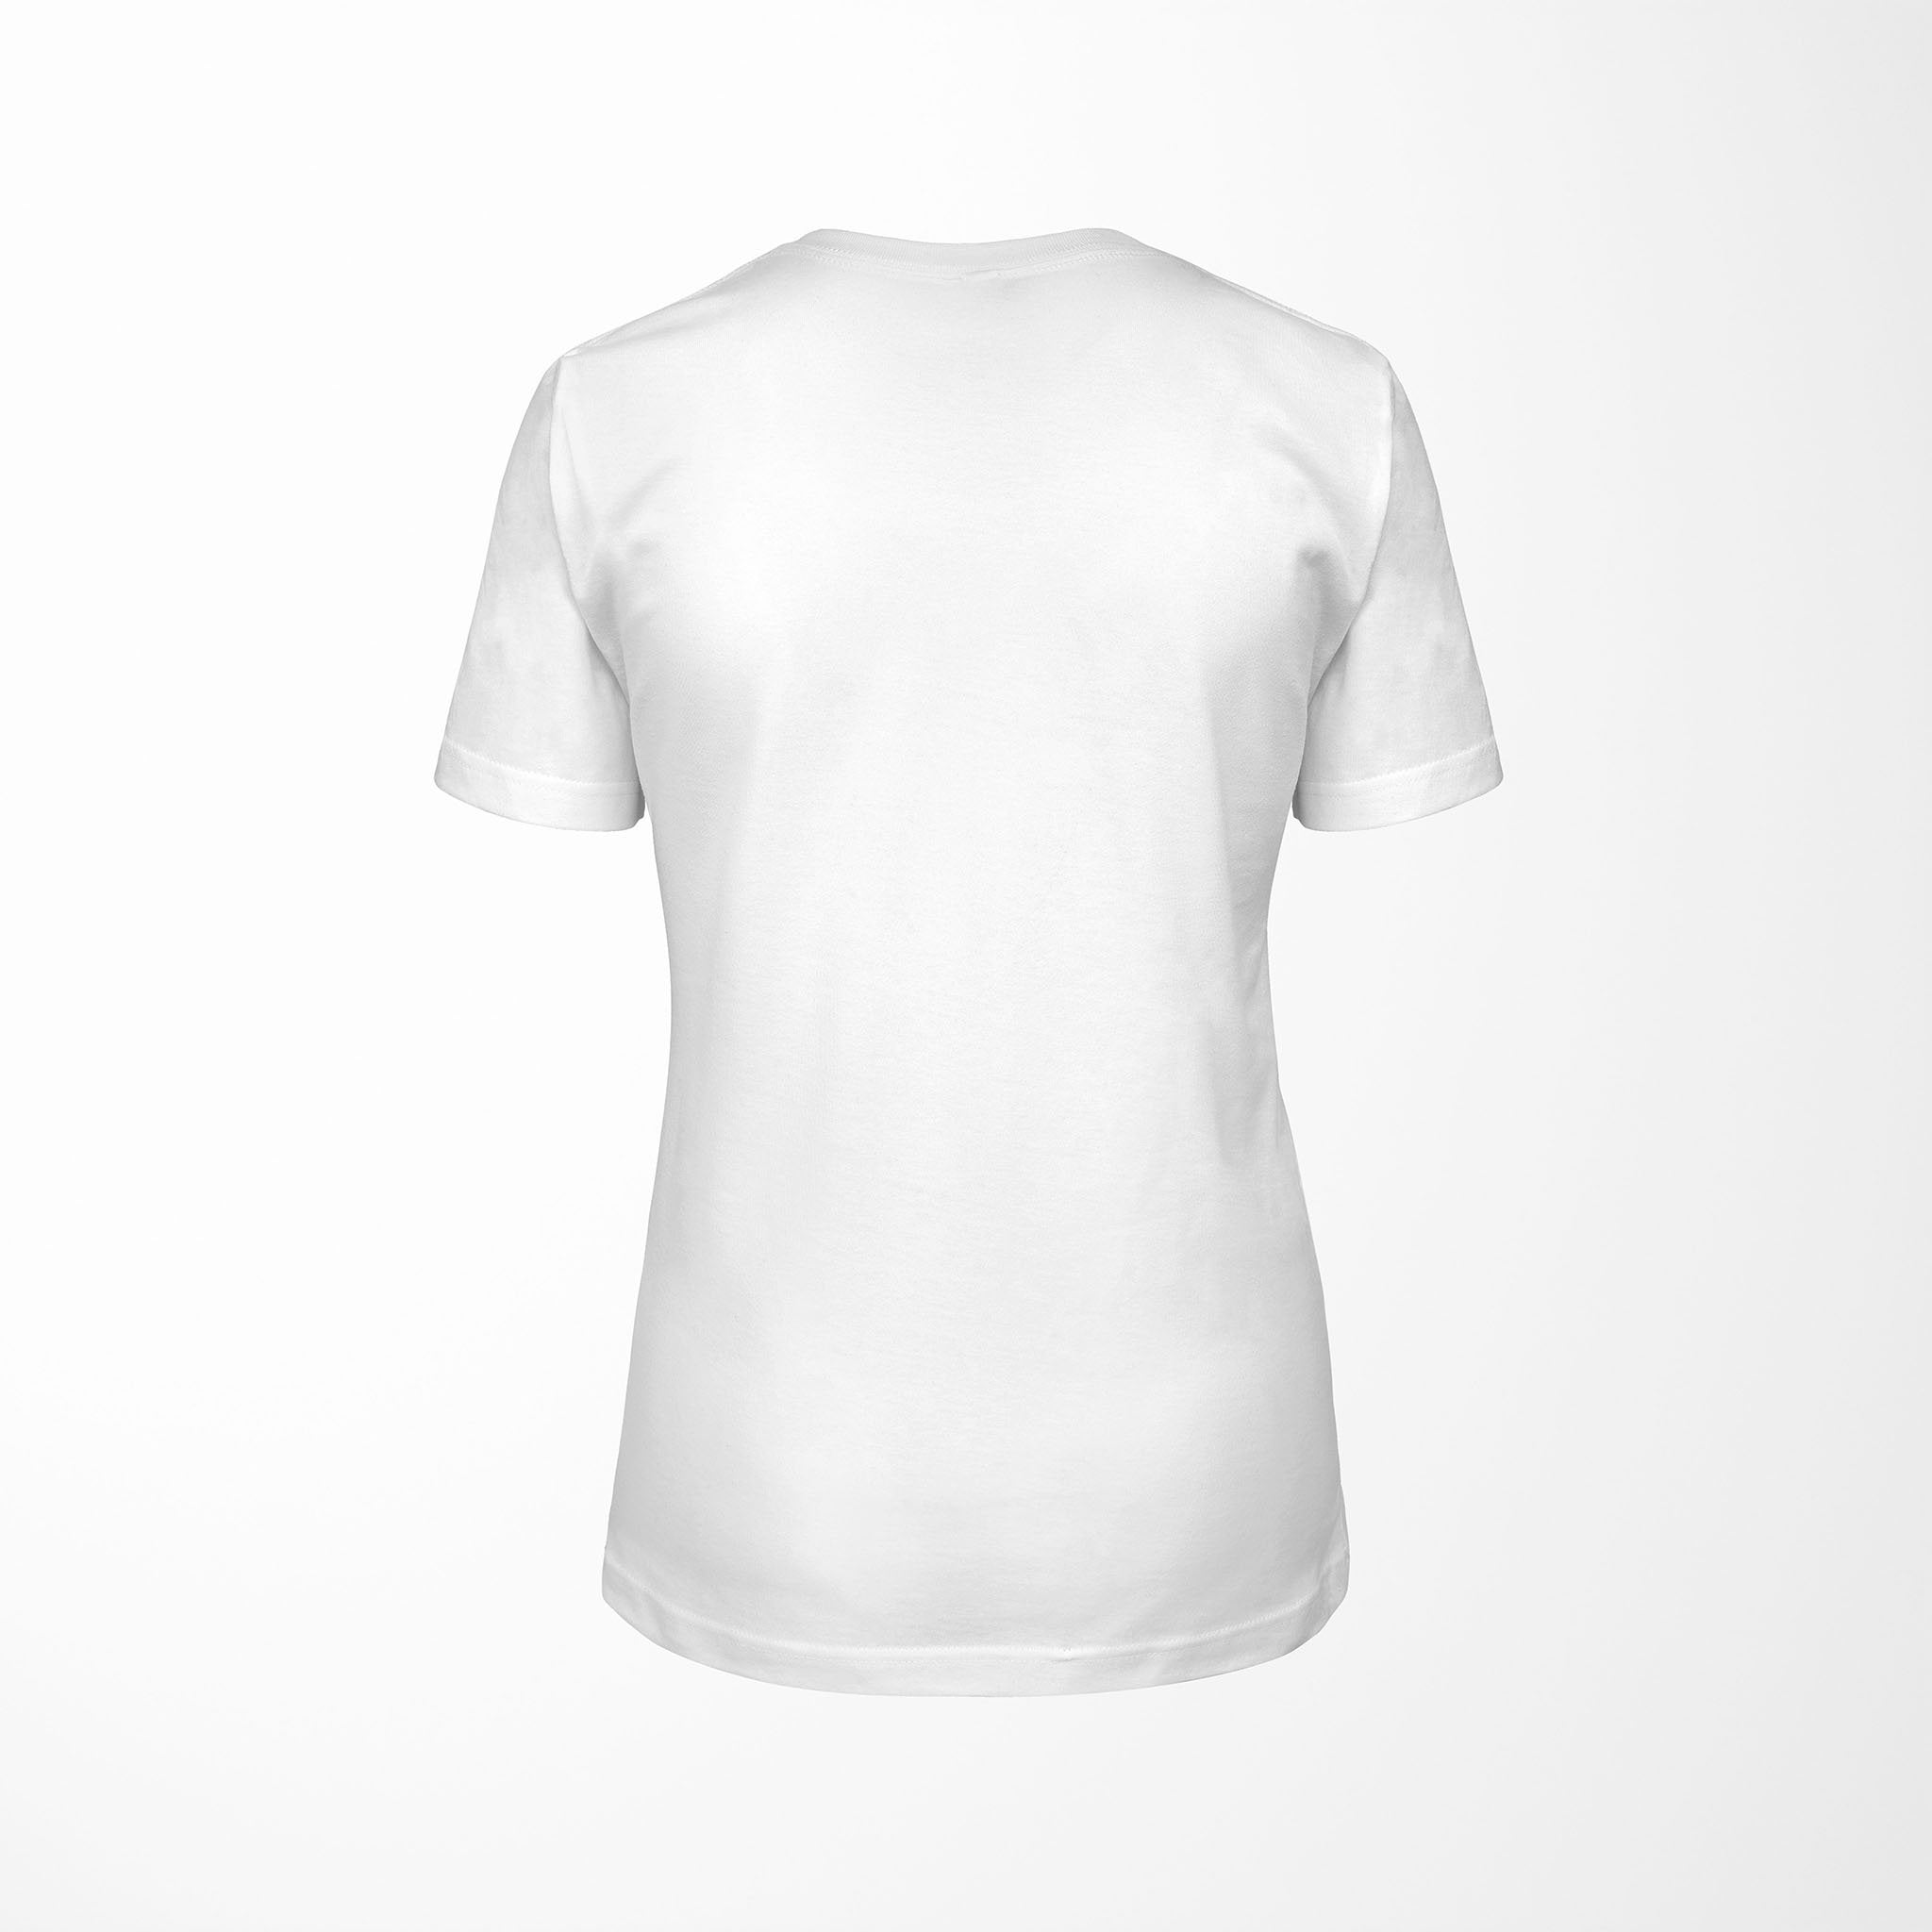 IMPLODE Relaxed Fit Women's 100% Cotton White T-Shirt back